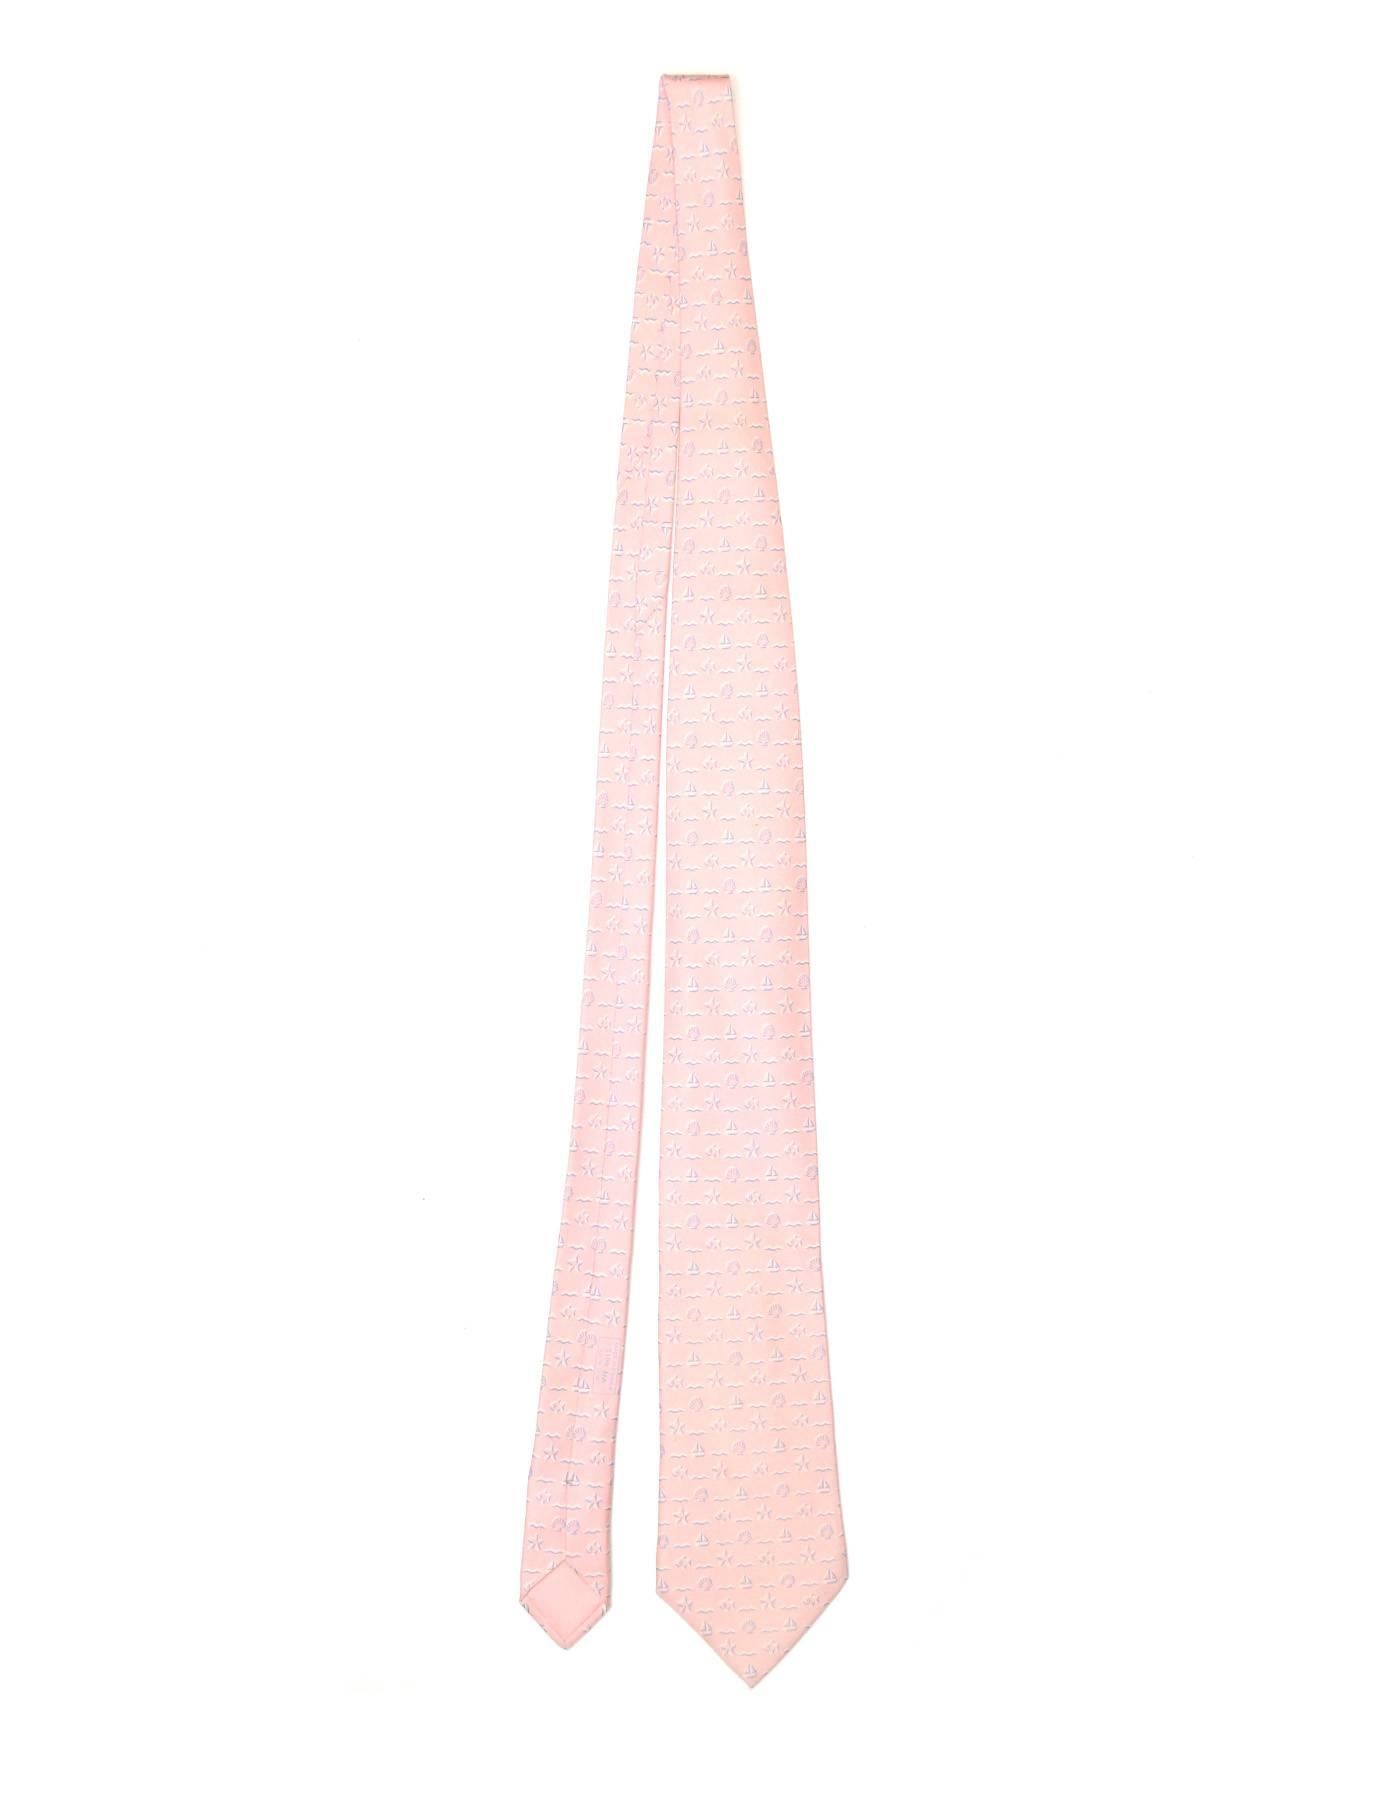 Hermes Pink Sea Theme Print Silk Tie

Made In: France
Color: Pink and blue
Composition: 100% silk
Retail Price: $180 + tax
Overall Condition: Excellent pre-owned condition 
Measurements: 
Length: 62.5"
Width: 1.75"-3.75"